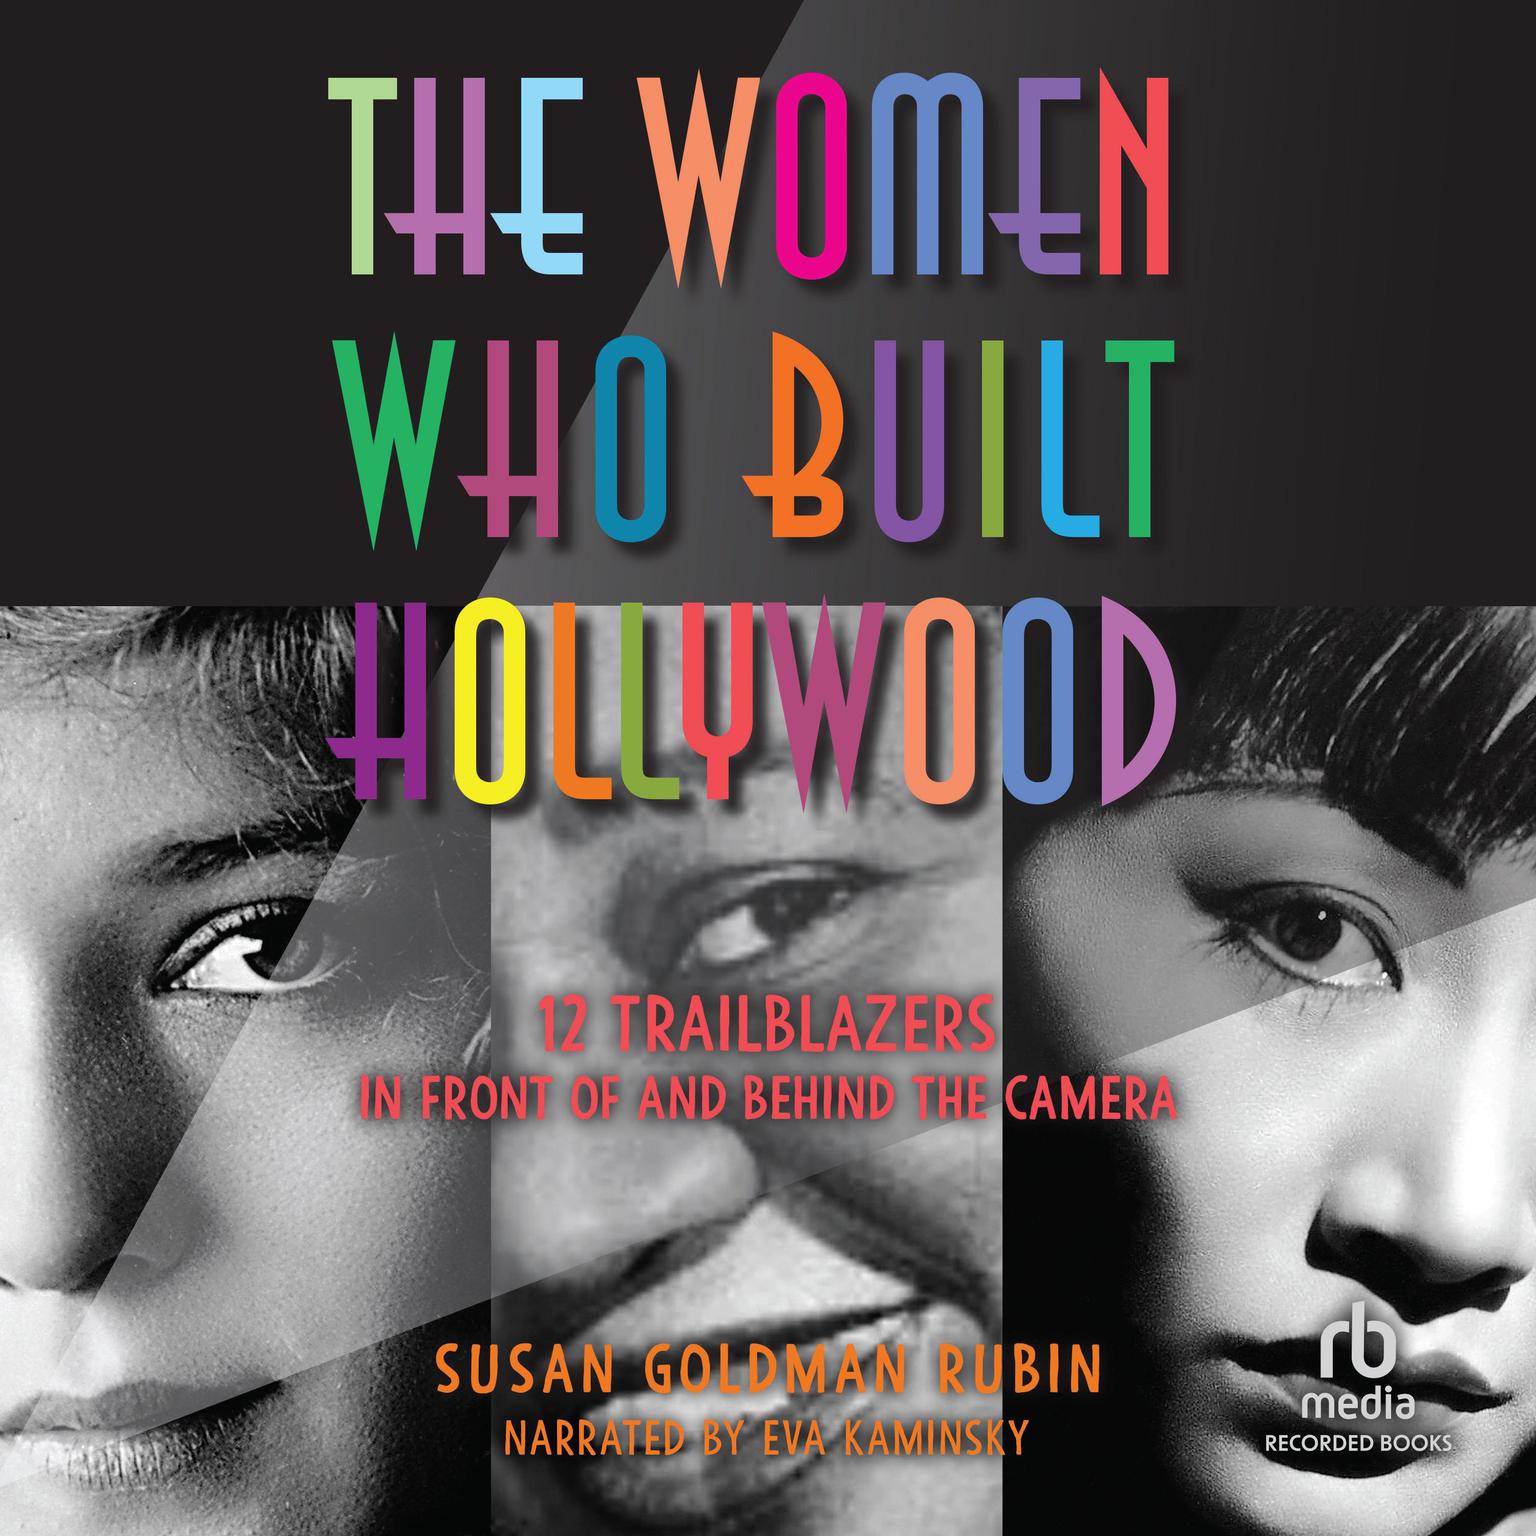 The Women Who Built Hollywood: 12 Trailblazers in Front of and Behind the Camera Audiobook, by Susan Goldman Rubin